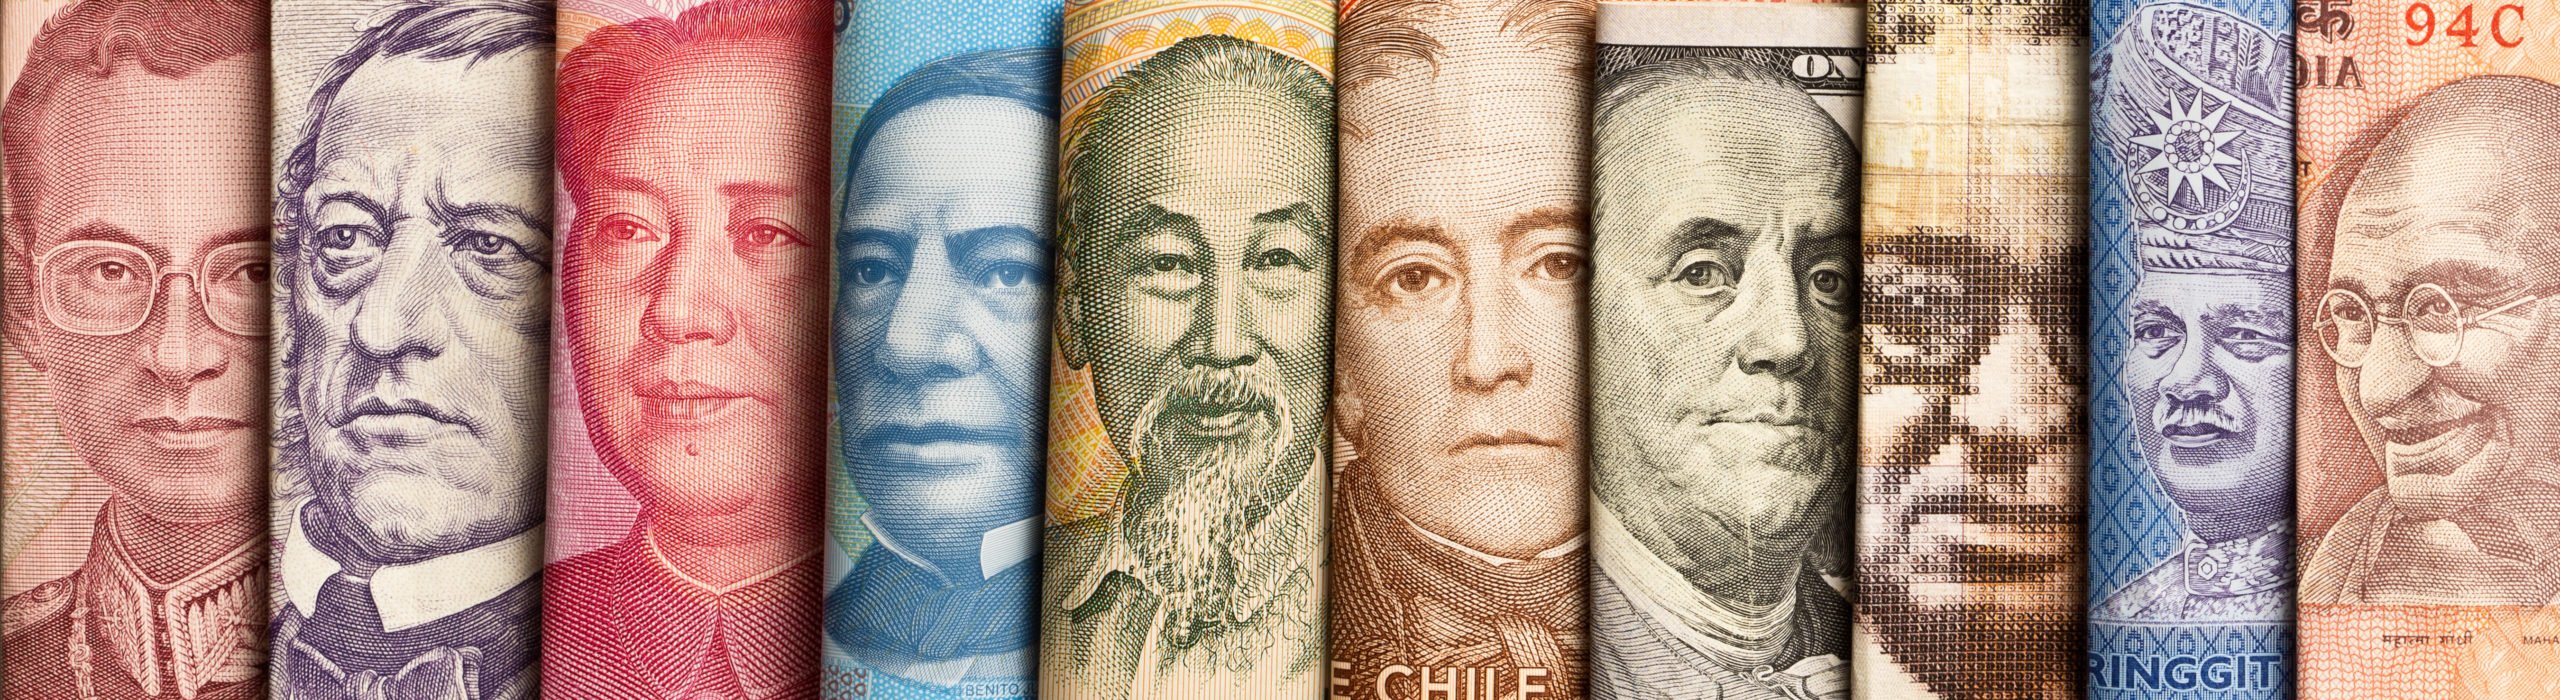 Various International Currency with World Leaders Portraits